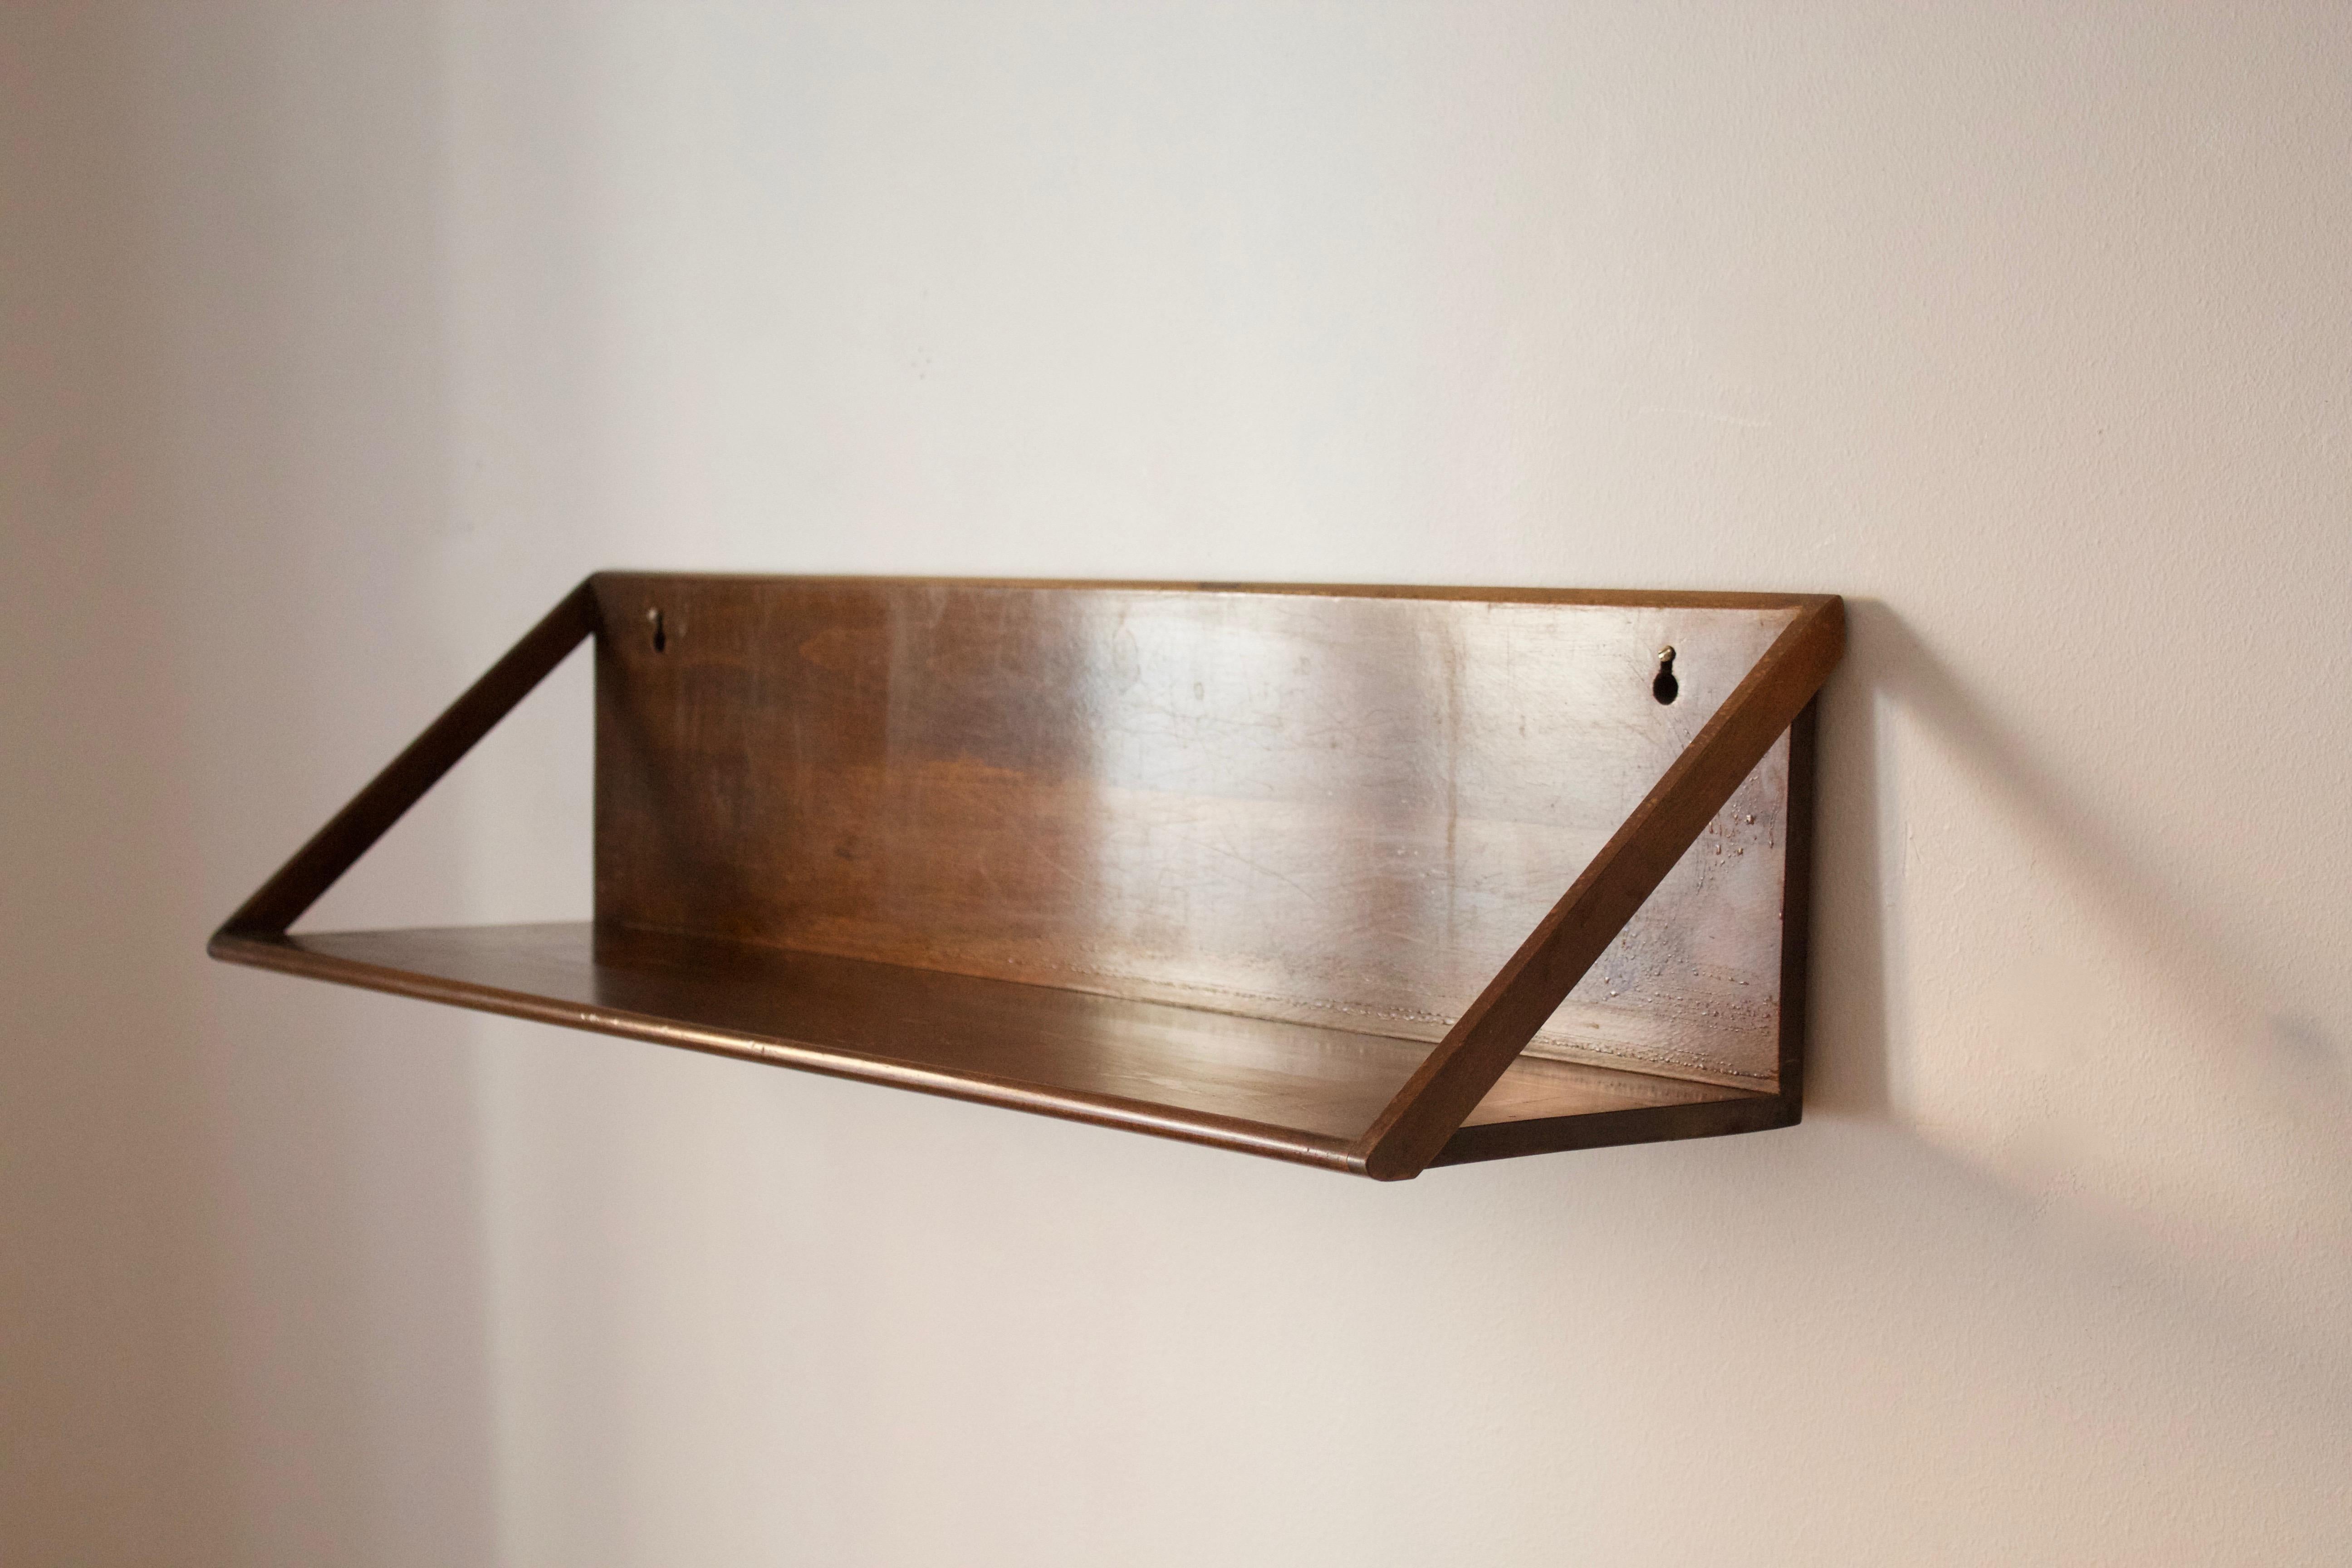 A minimalist wall shelf. Designed and produced in Denmark, 1950s.

Other designers of period include Axel Einar Hjorth, Pierre Jeanneret, Franco Albini, Alvar Aalto, and Kaare Klint.